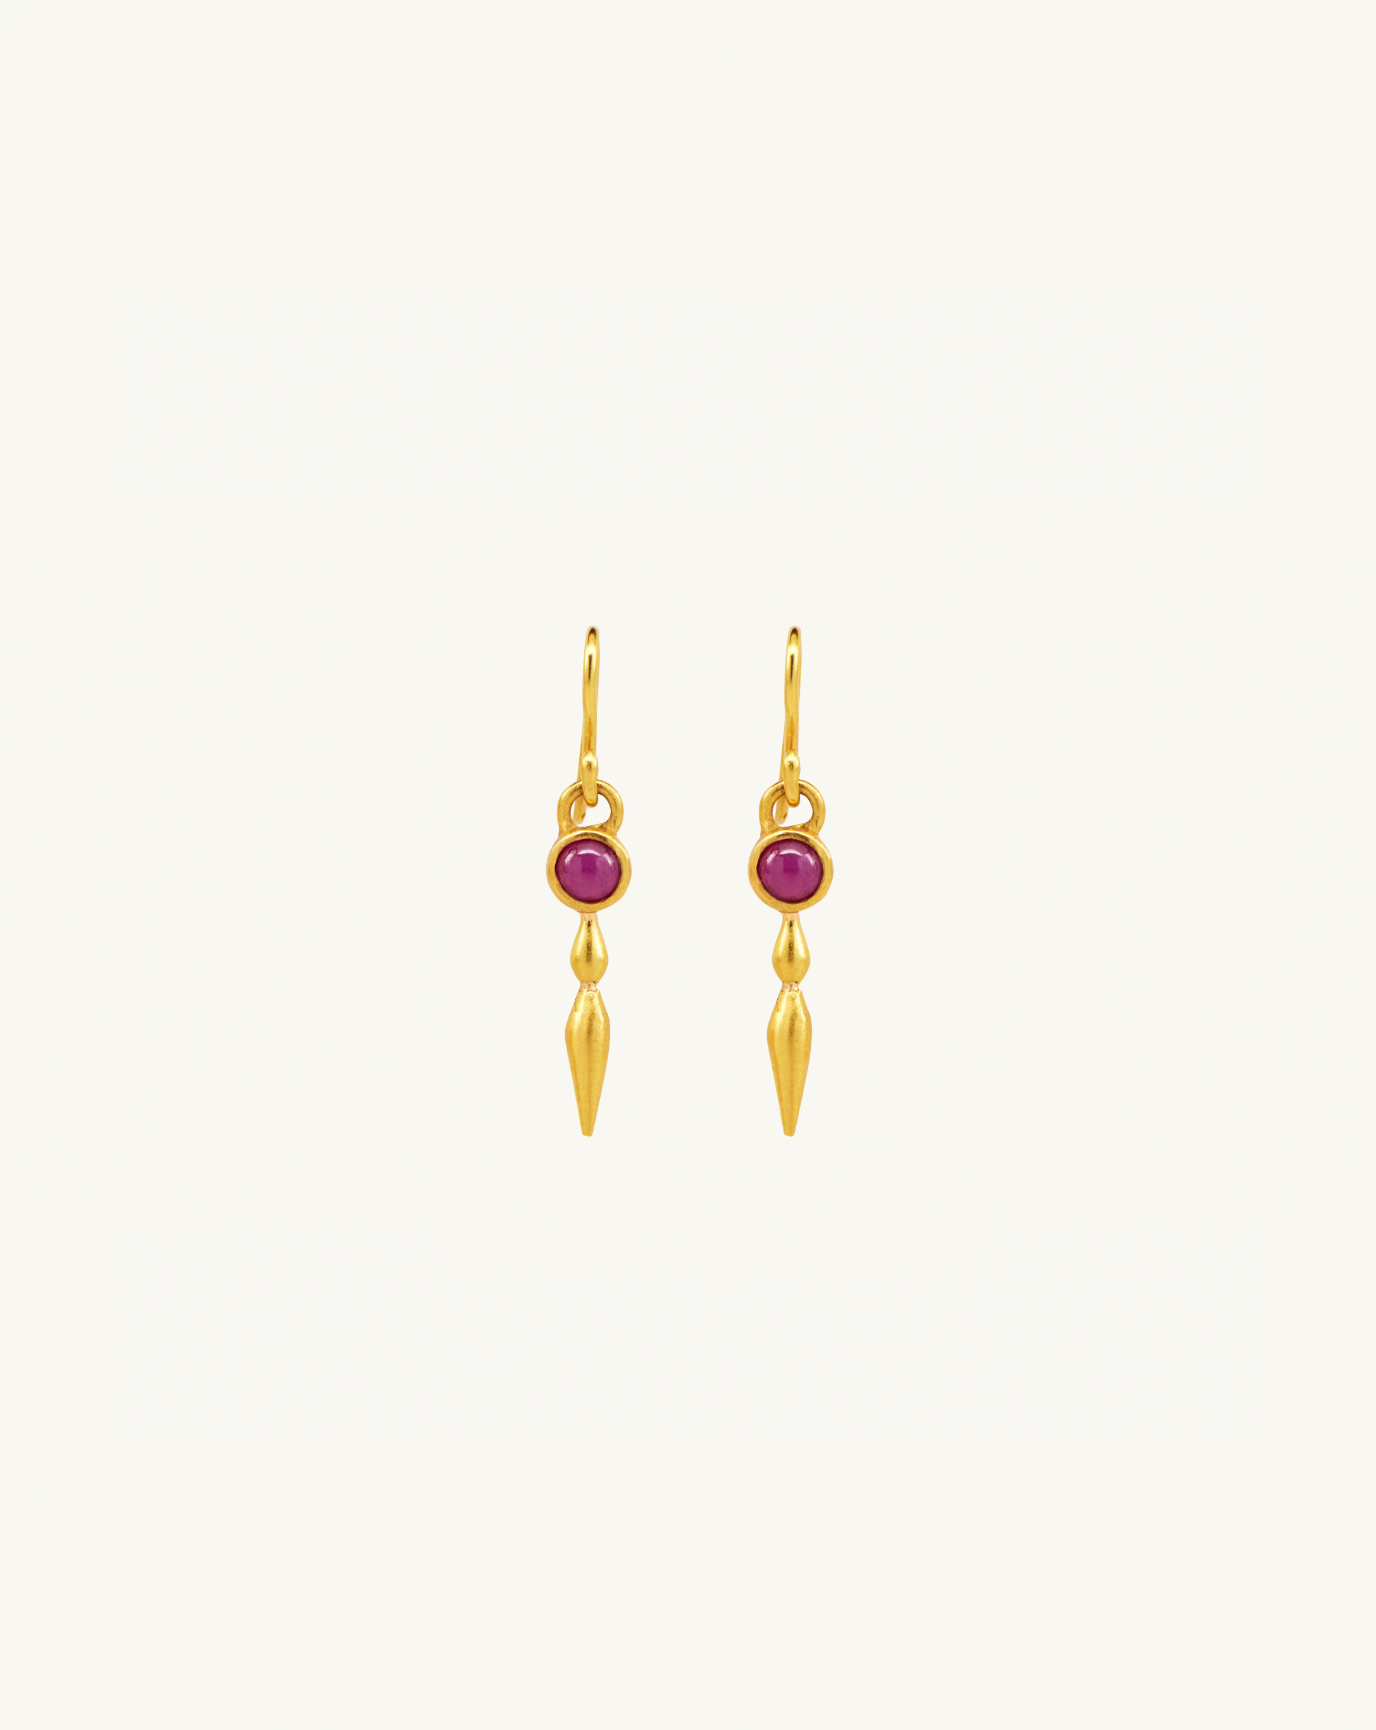 Product image of the gemstone drop earrings with two small circle ruby gemstones